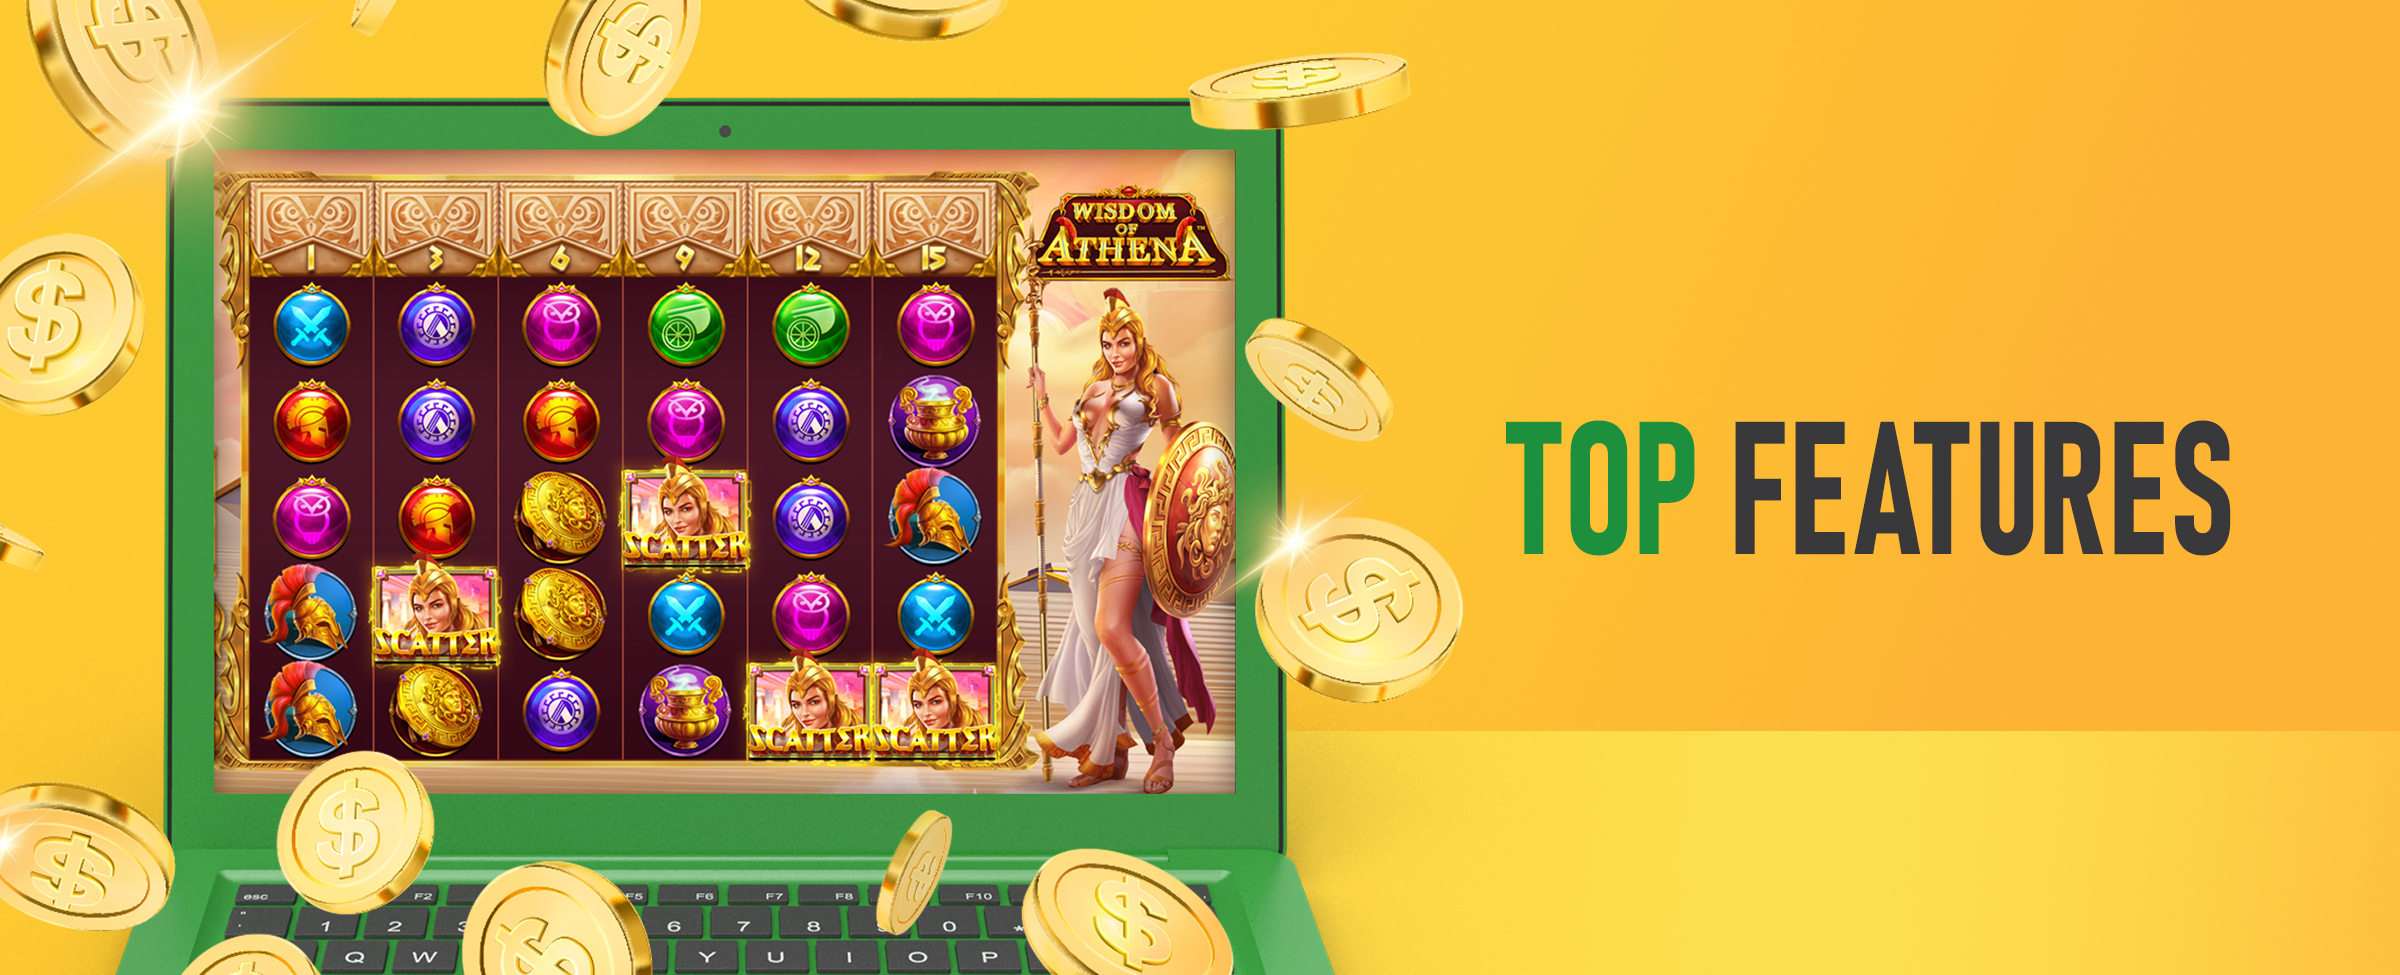 A screenshot from the Joe Fortune online pokie, Wisdom of Athena surrounded by golden coins. Beside it reads ‘Top Features’. On a vibrant yellow background.